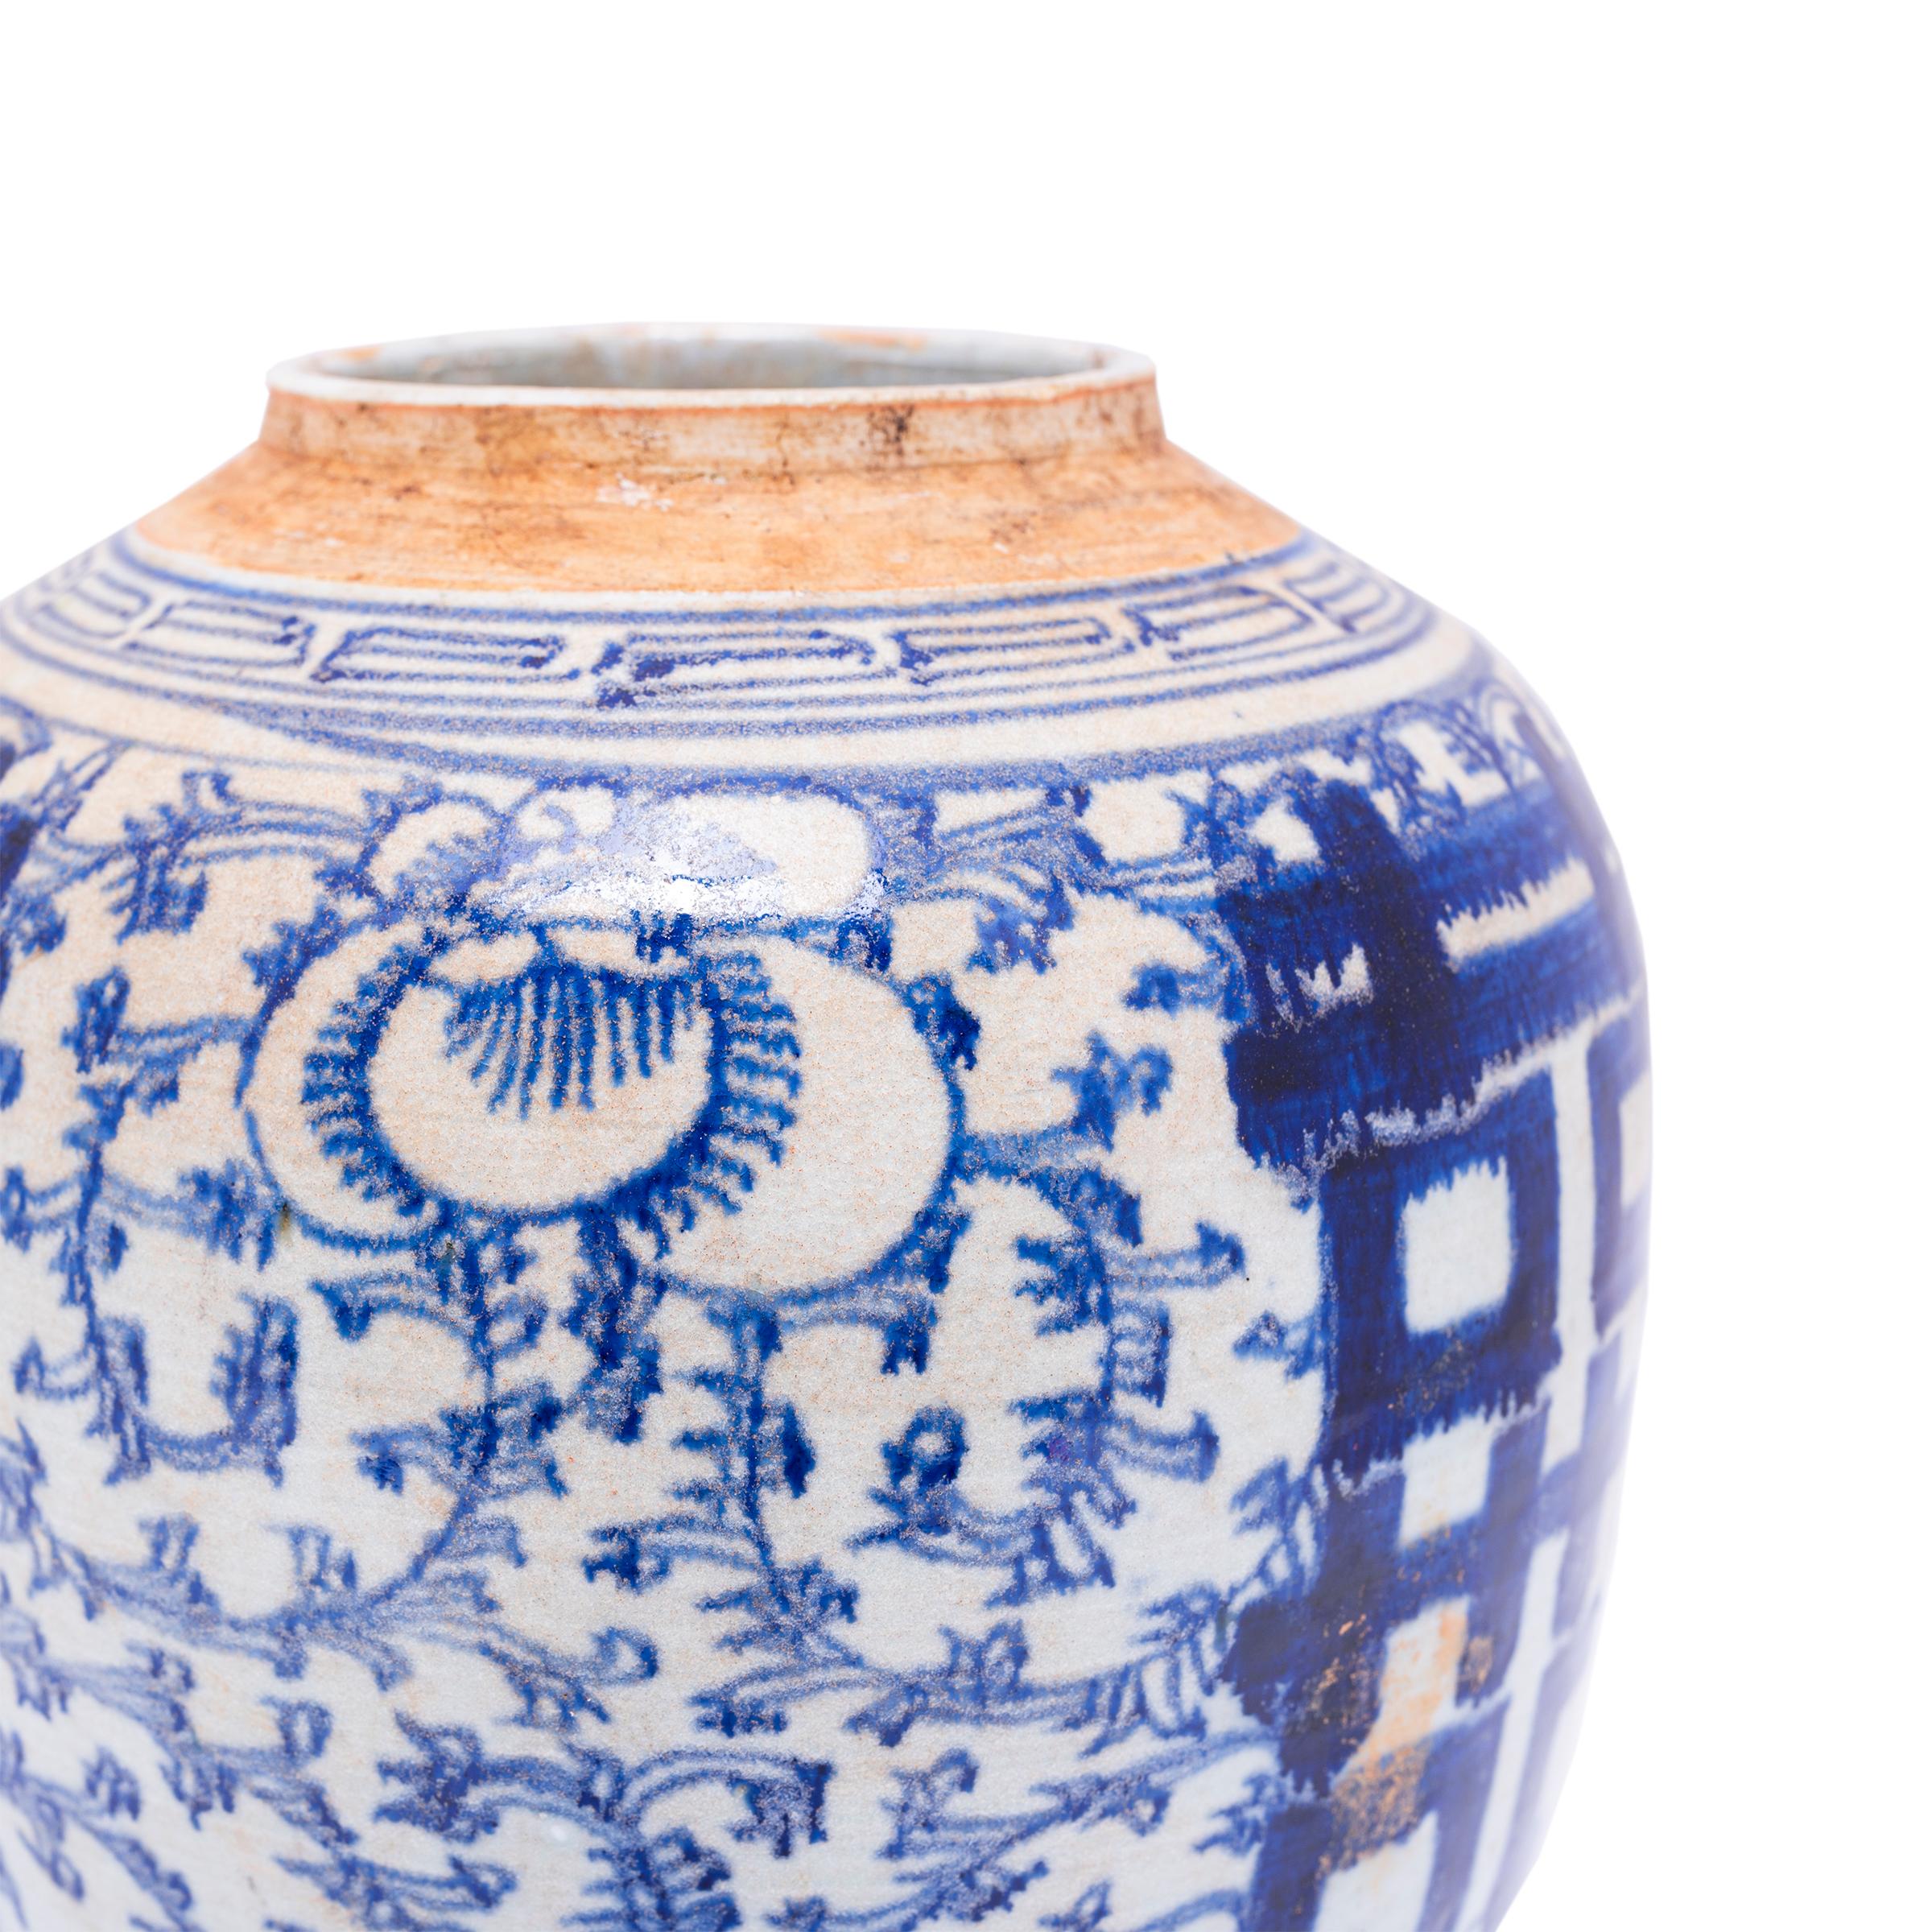 Glazed Chinese Blue and White Double Happiness Jar, c. 1900